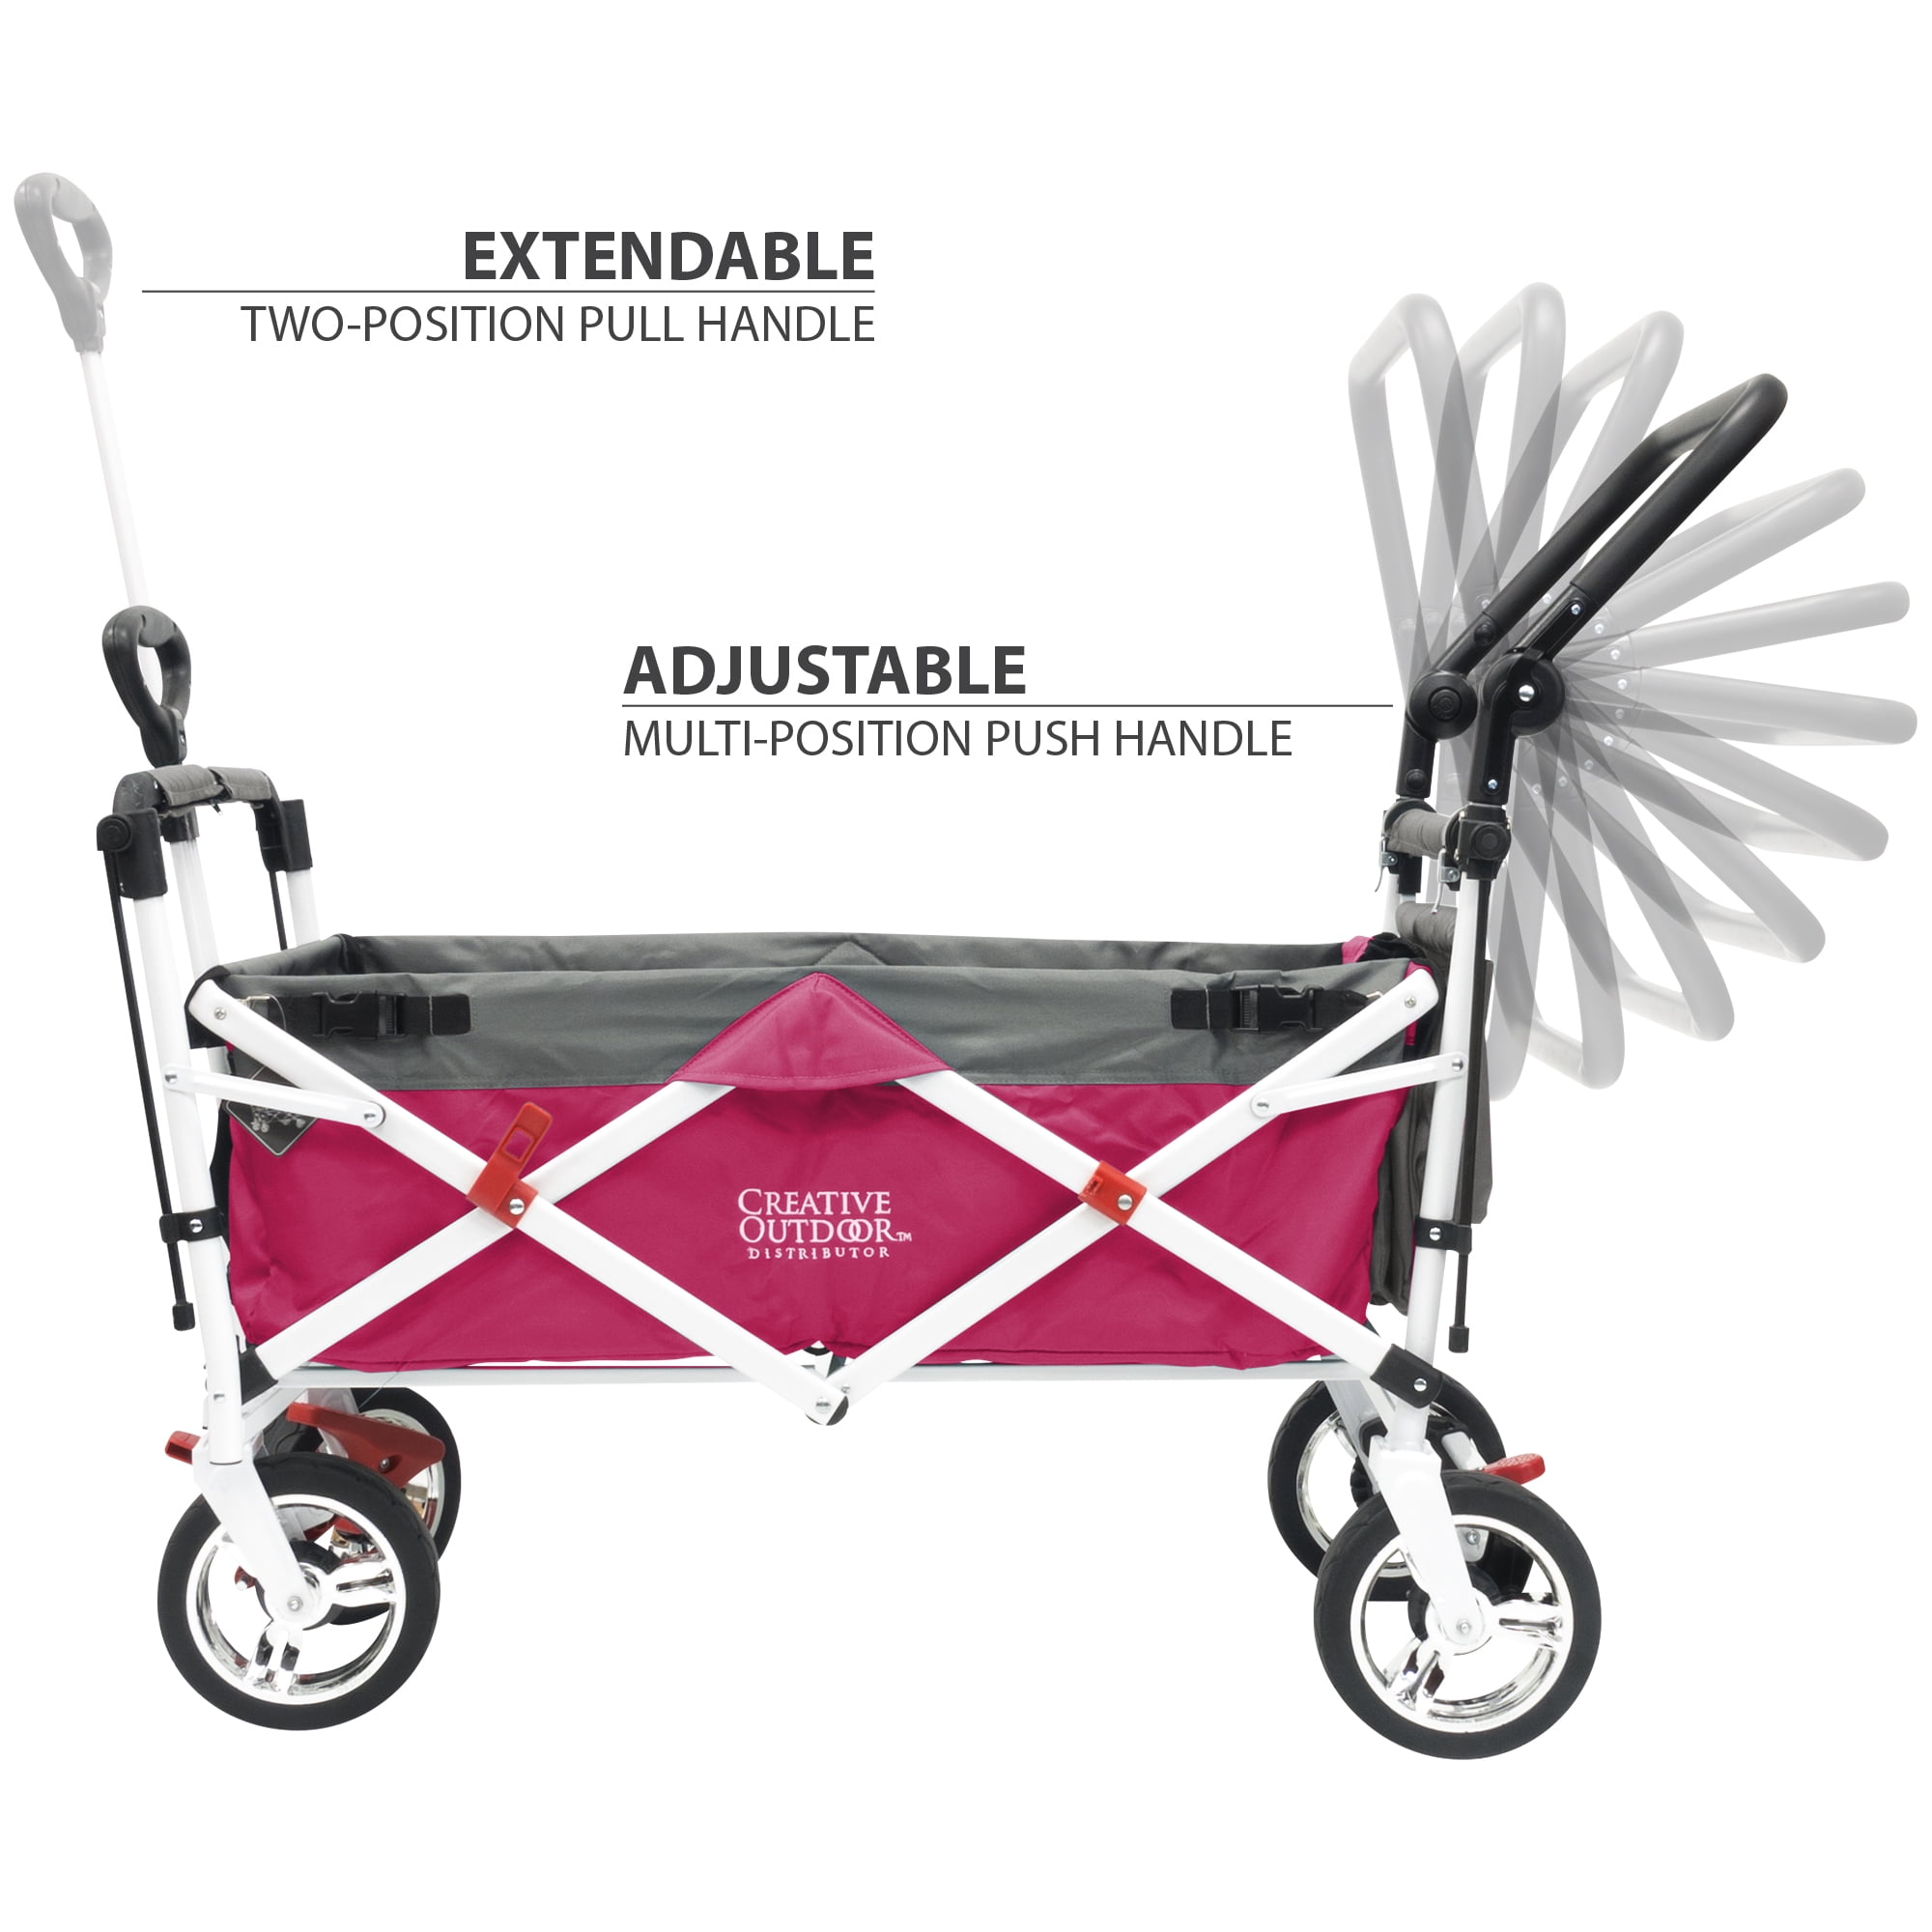 creative outdoor push pull collapsible folding wagon stroller cart for kids